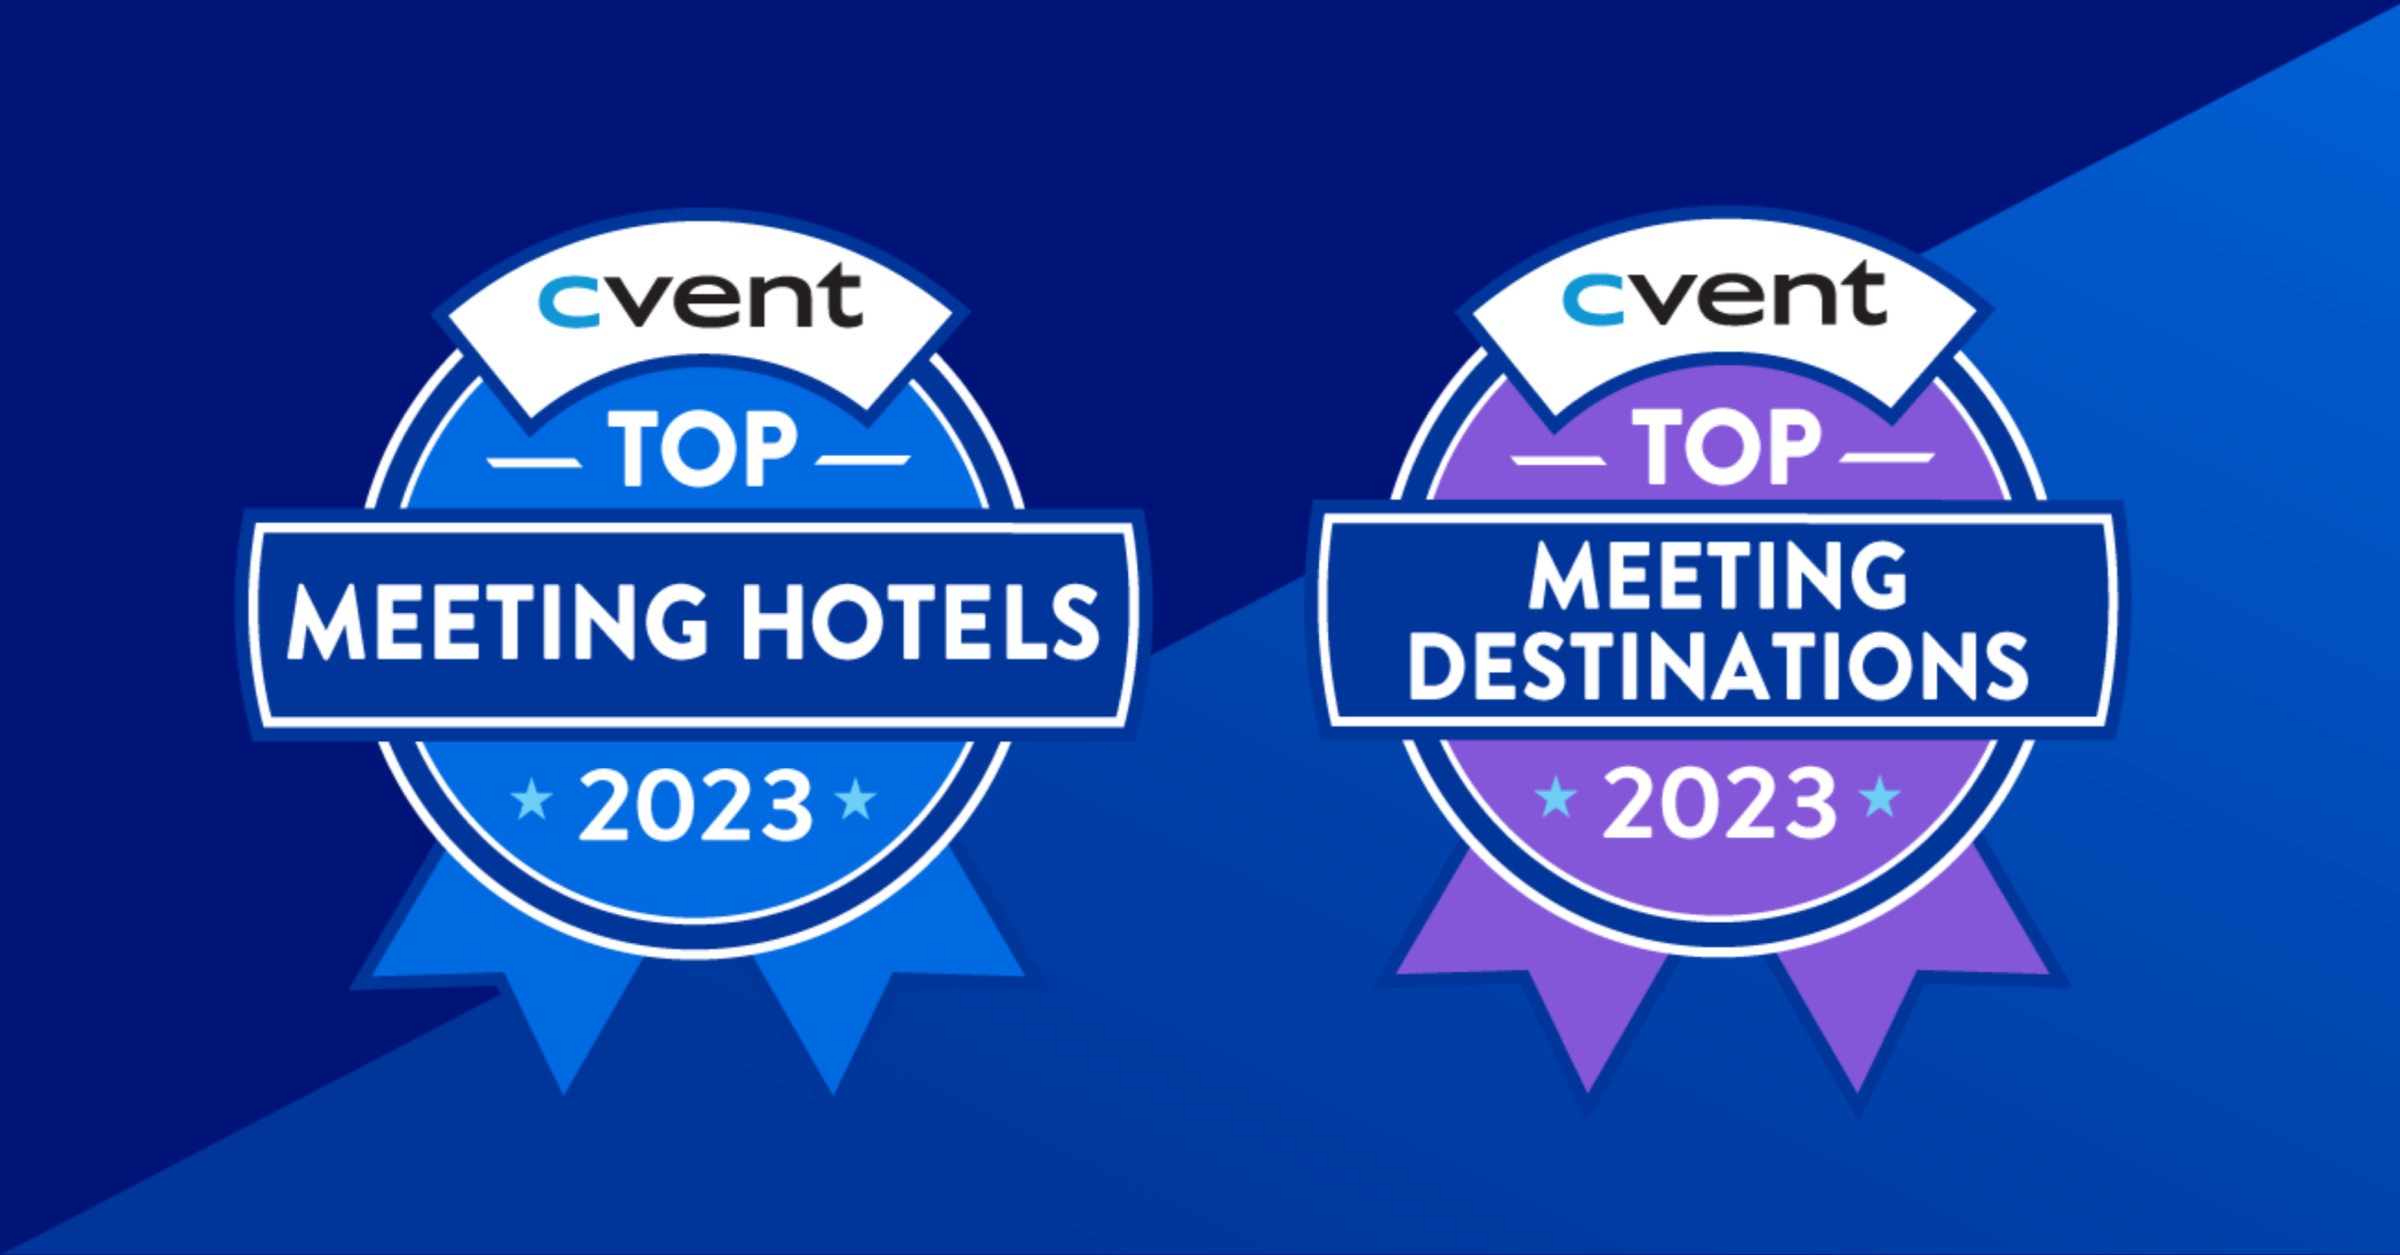 Cvent’s Annual List for Top Meeting Hotels and Destinations Returns for